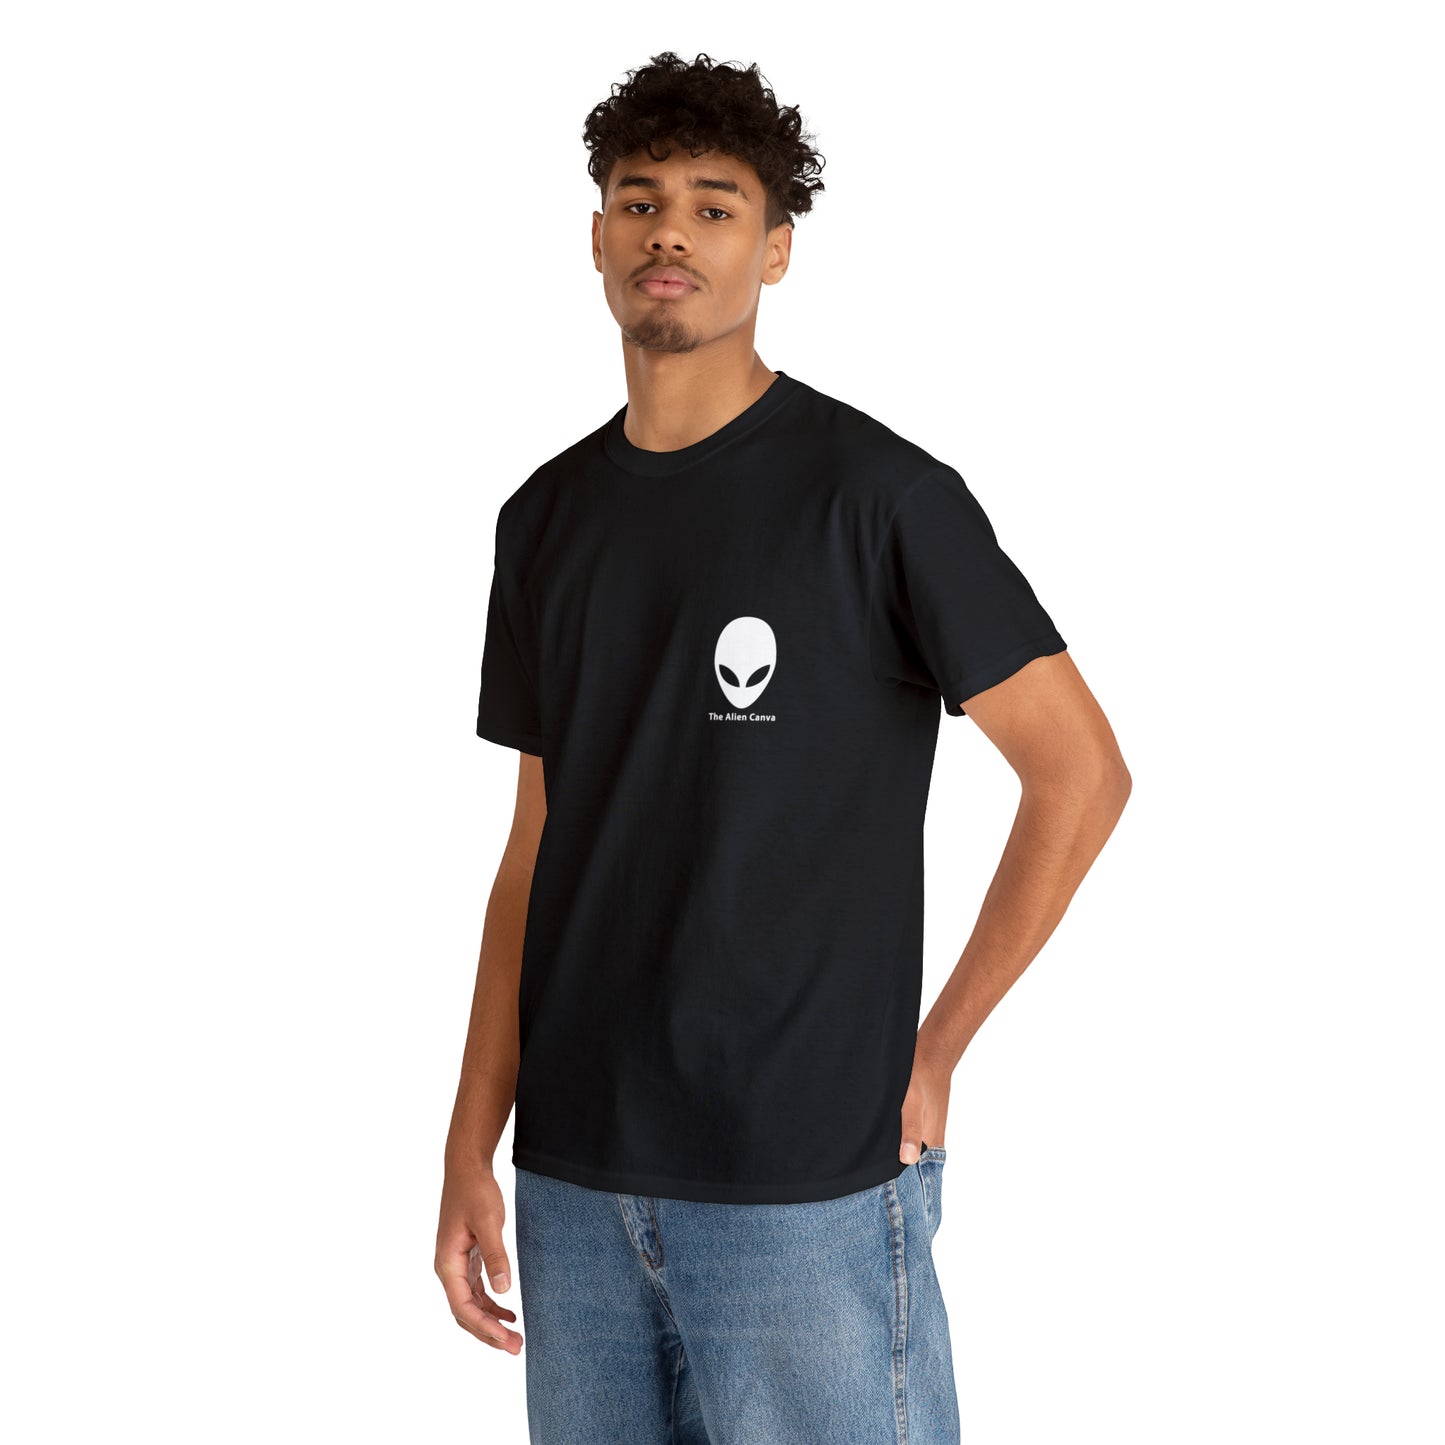 "A Beacon of Hope" - The Alien T-shirt